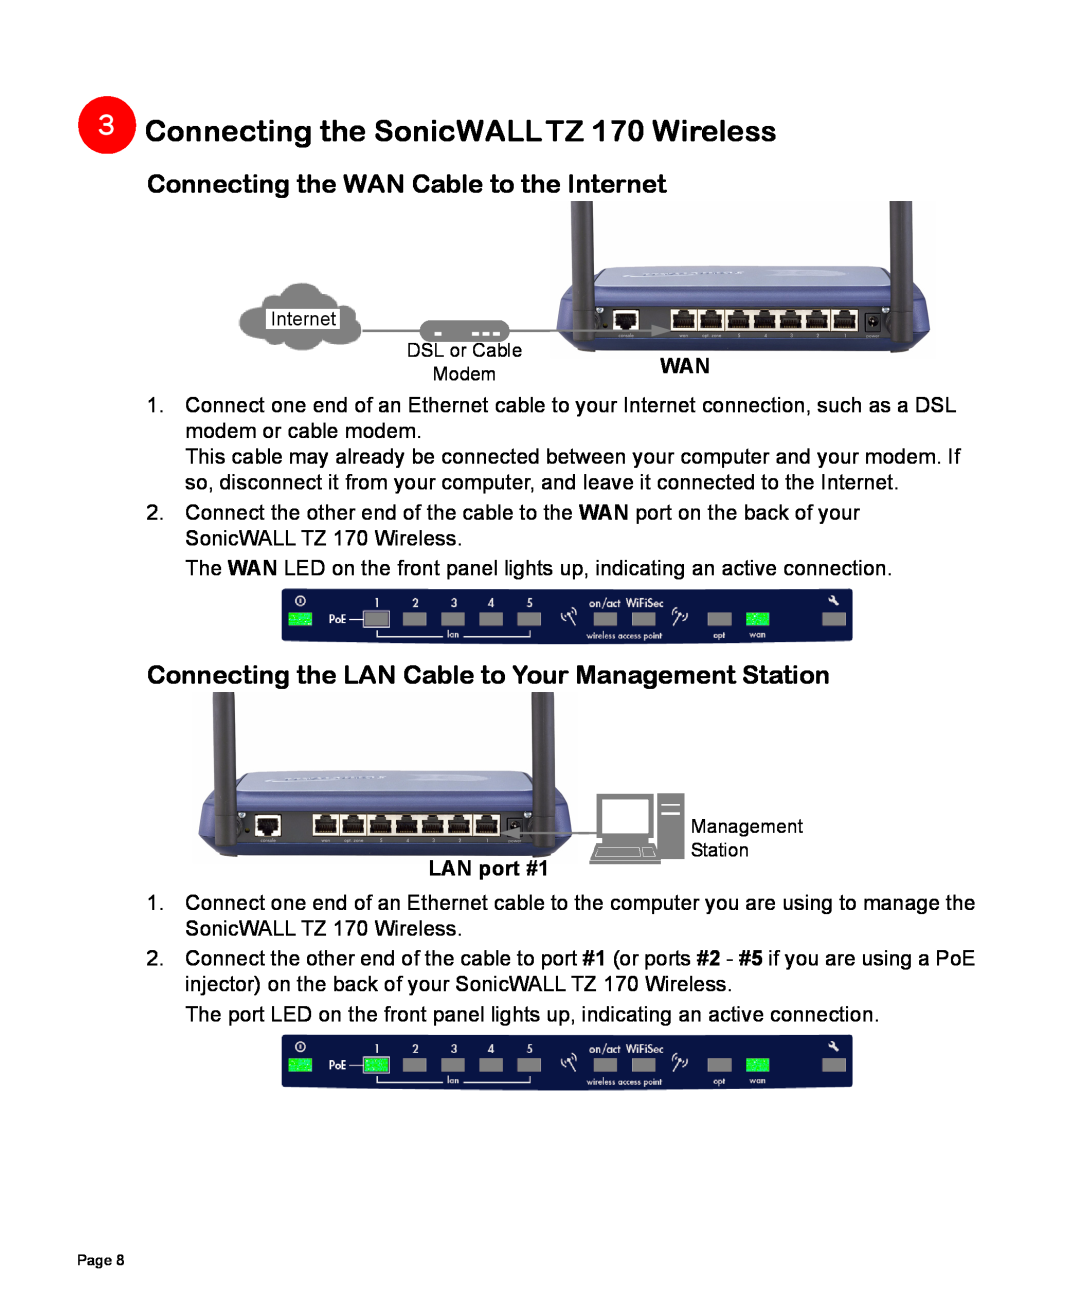 SonicWALL manual Connecting the SonicWALL TZ 170 Wireless, Connecting the WAN Cable to the Internet 